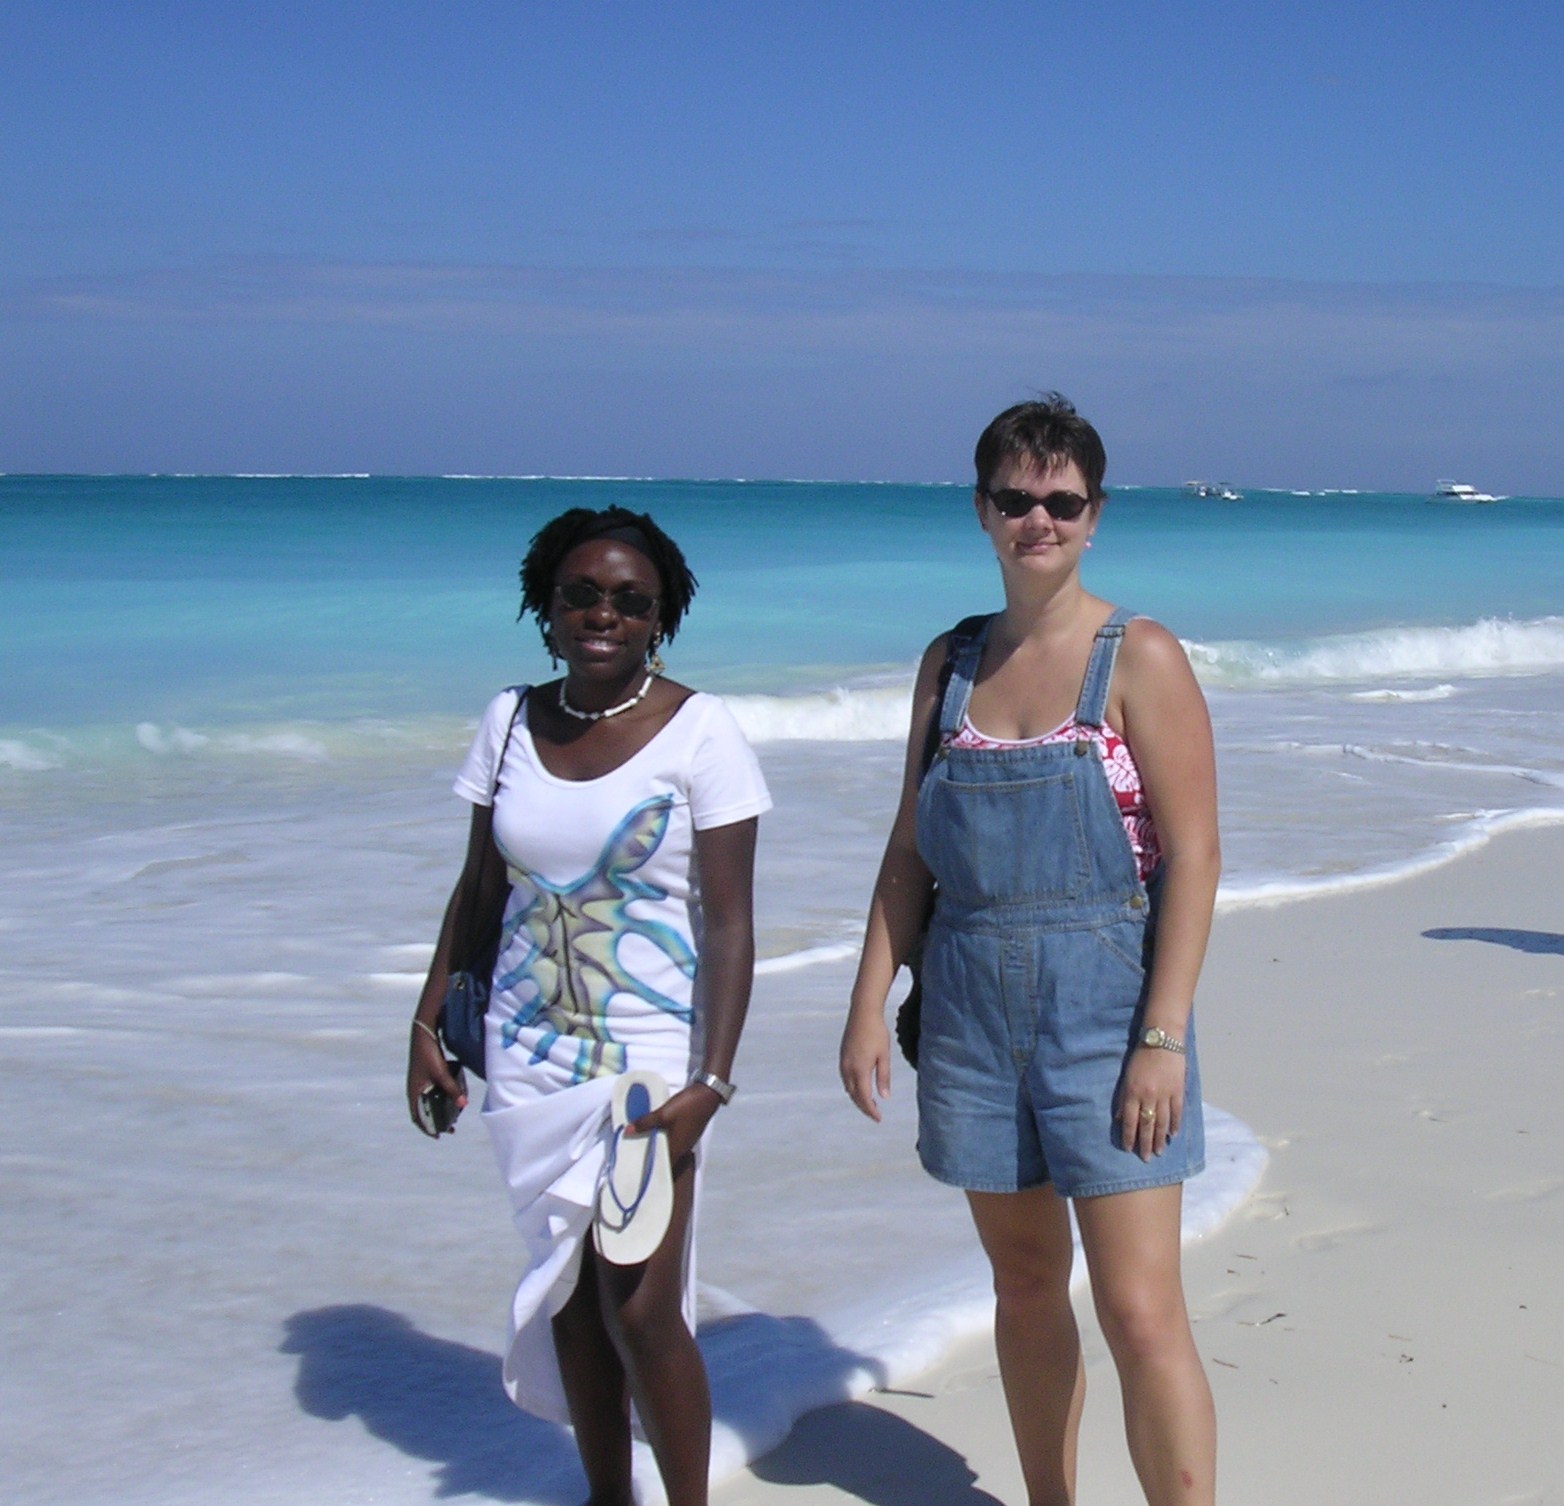 two friends on the beach at turks and caicos island